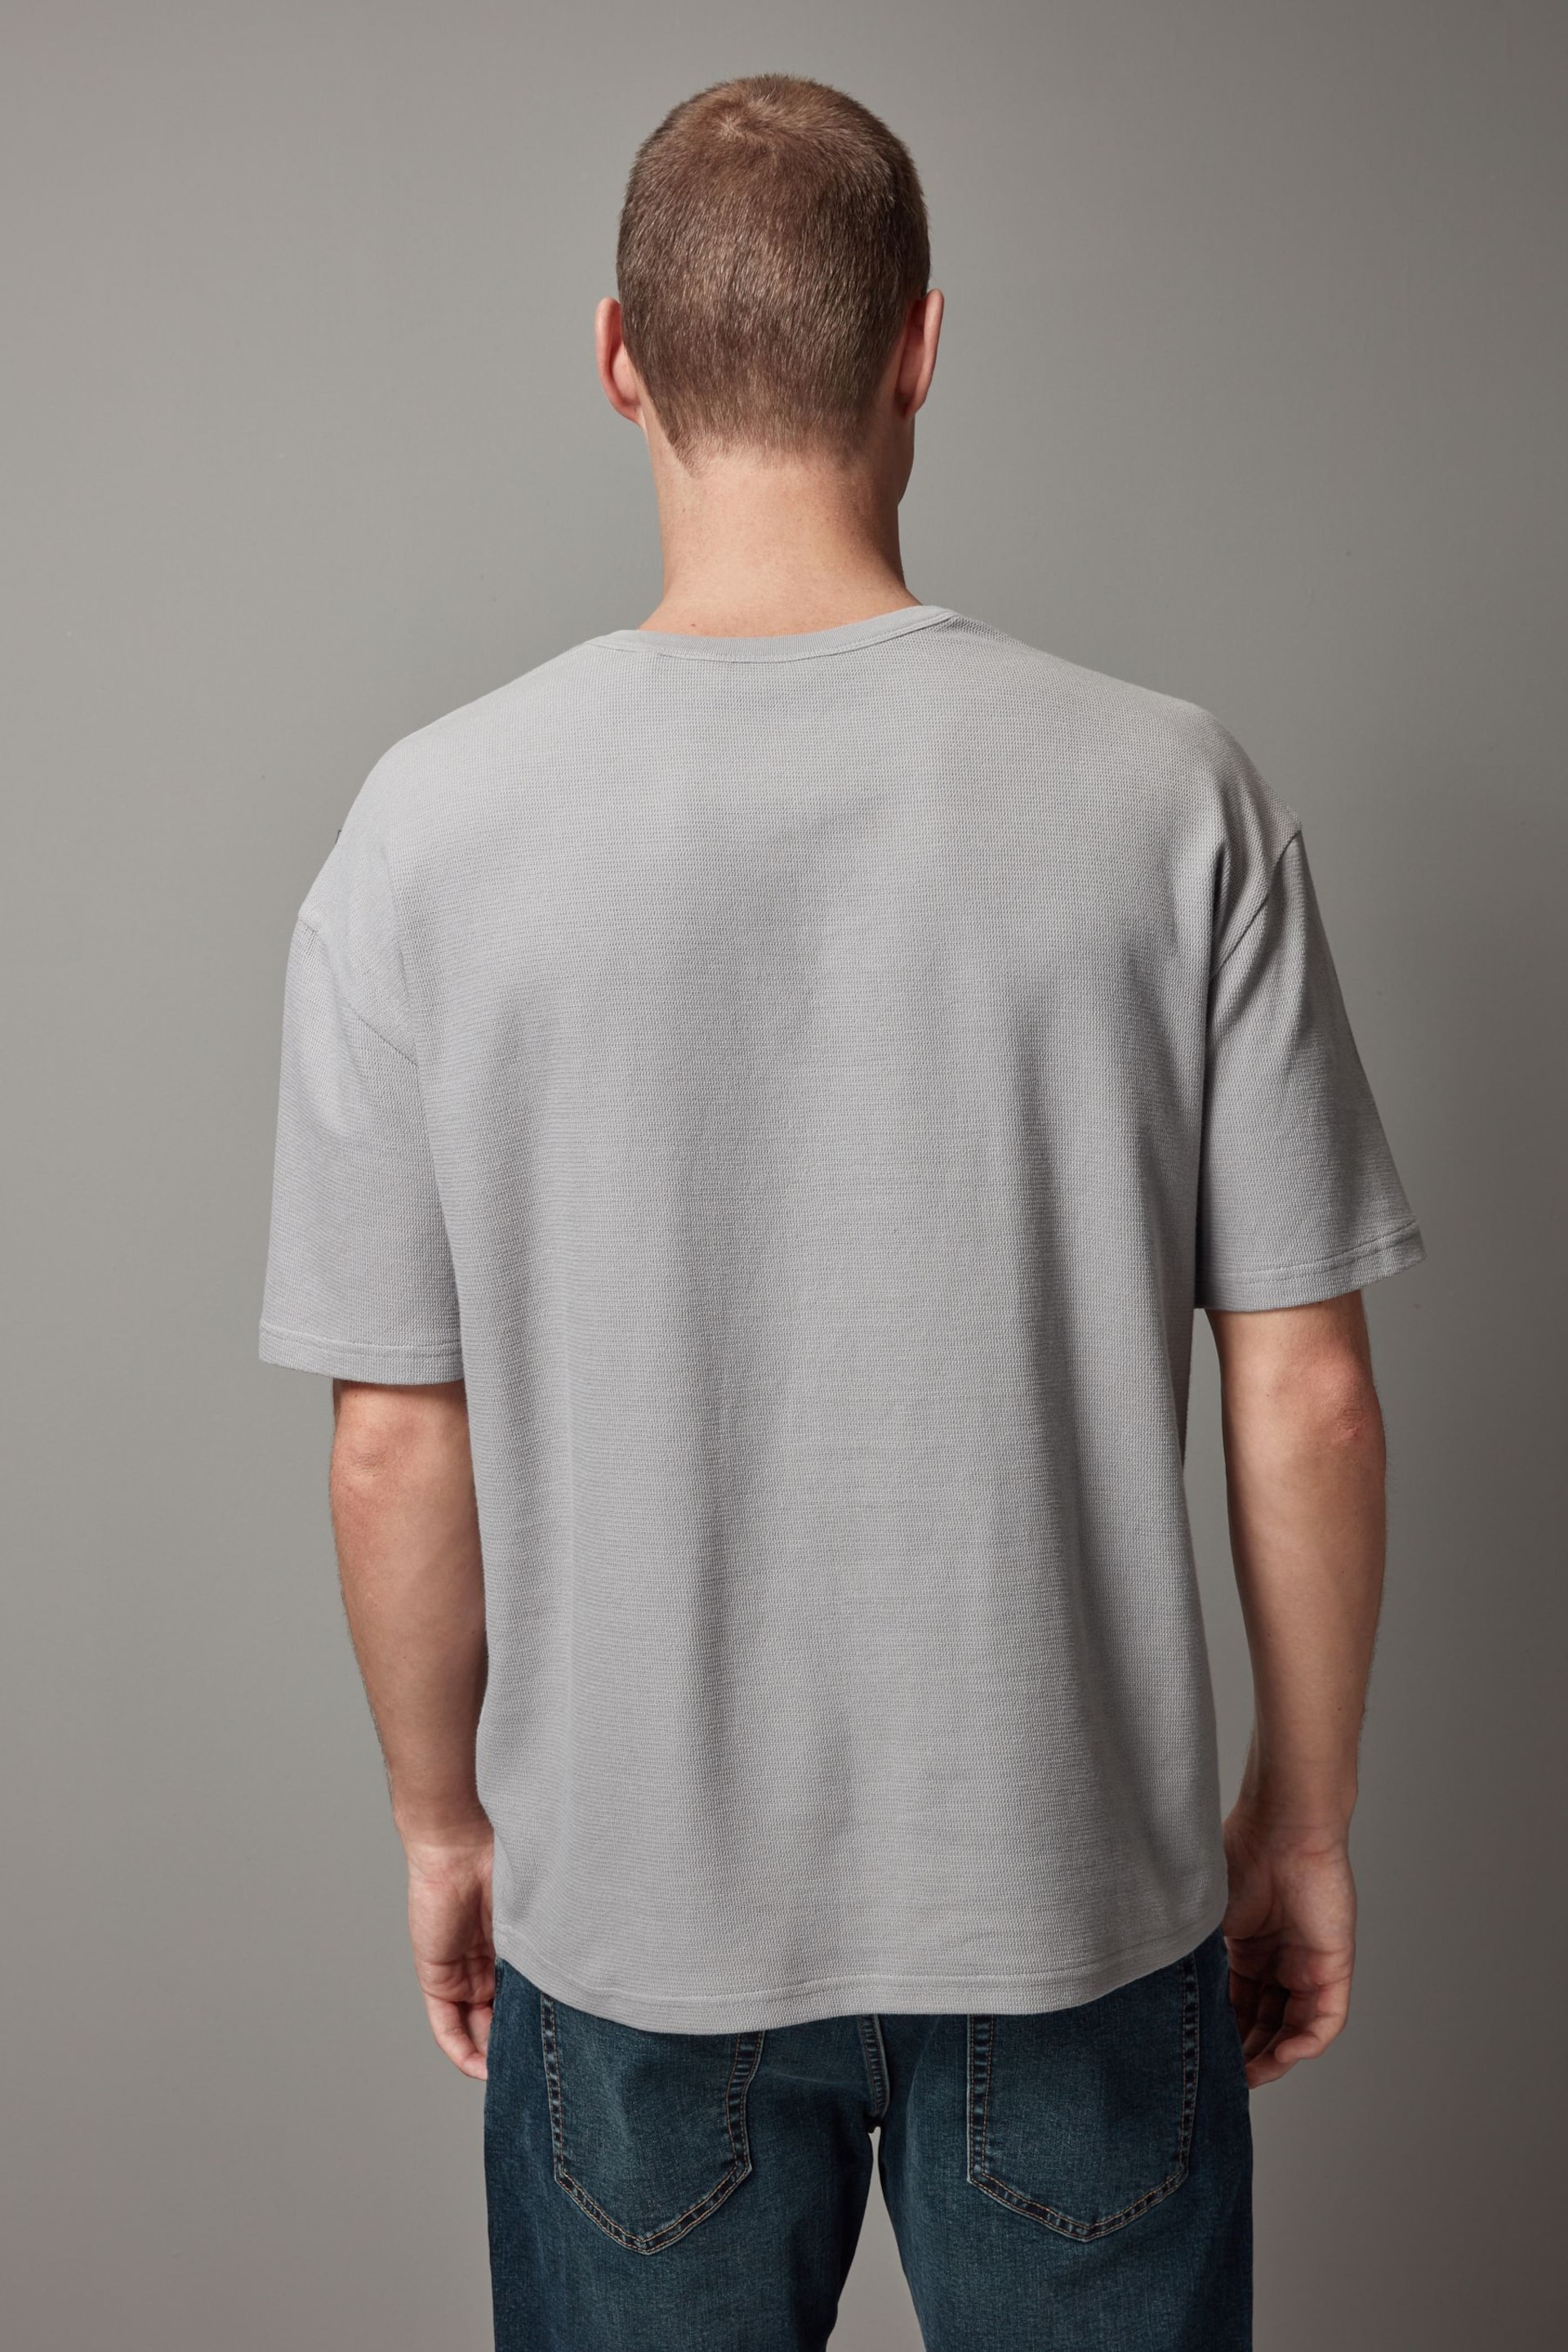 Light Grey Single Relaxed Fit Graphic Heavyweight T-Shirt - Image 3 of 5